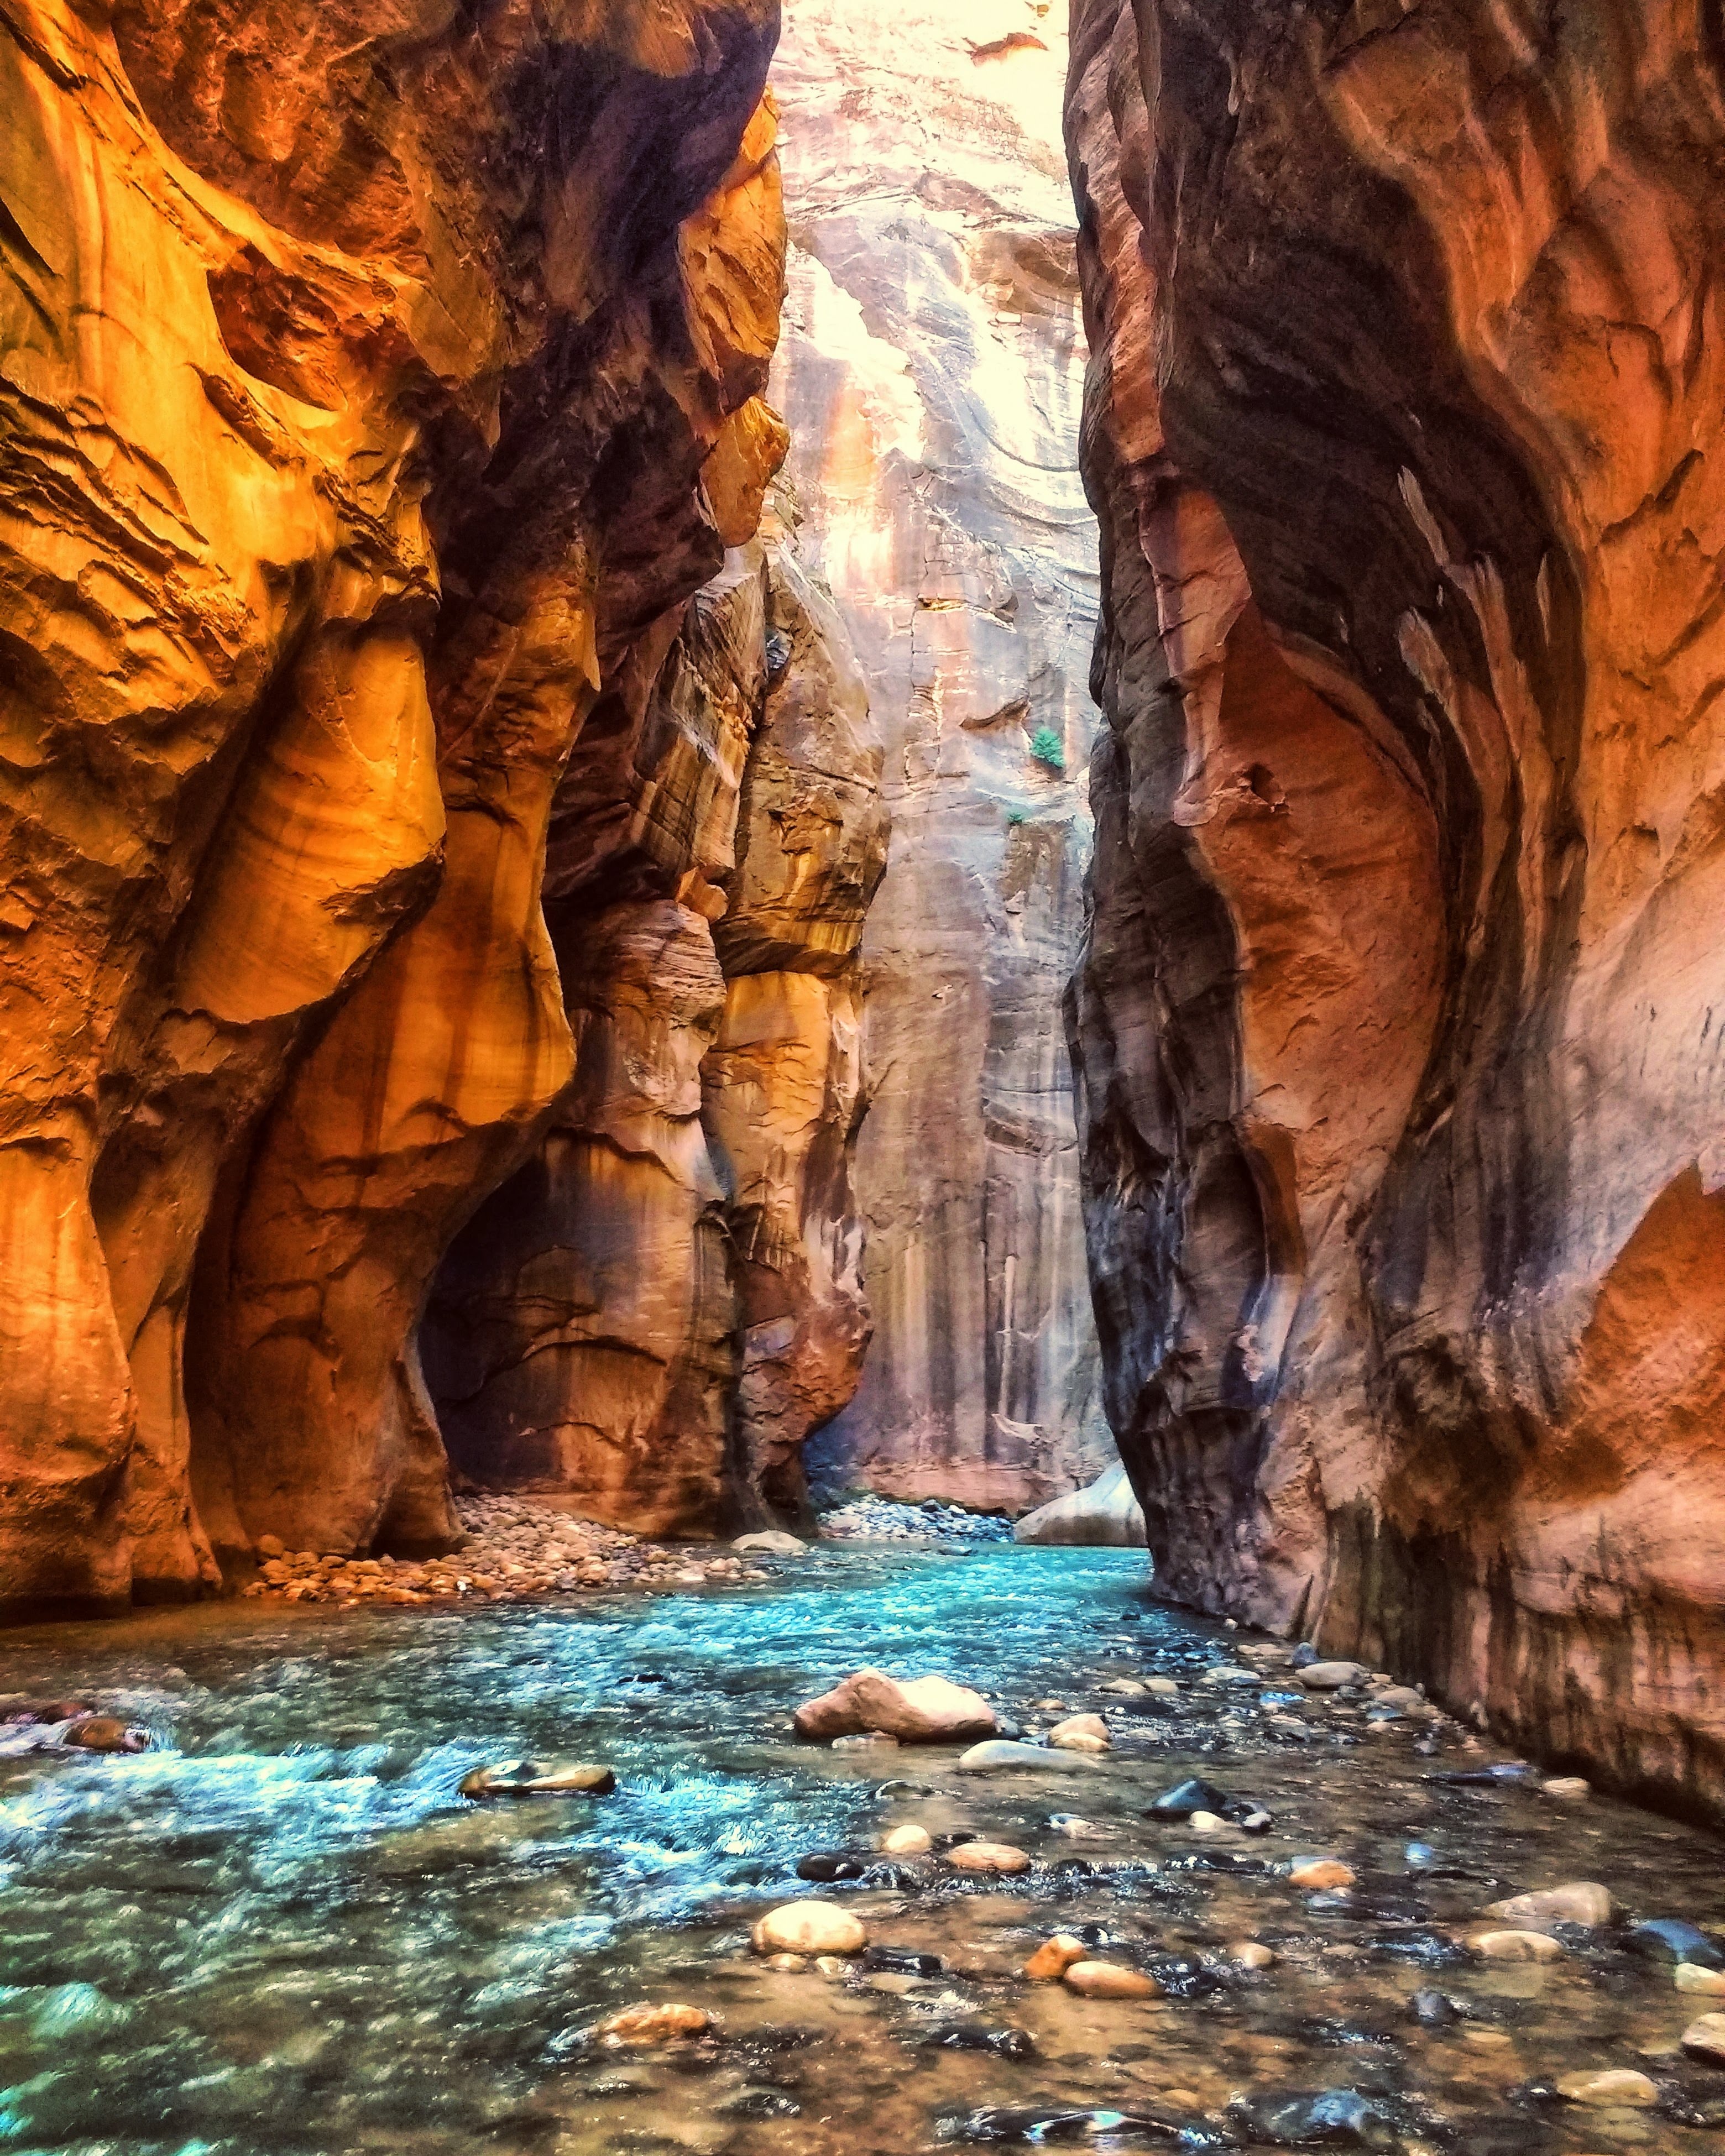 The Narrows canyon in Zion National Park. 4 Things to know when visiting Zion national park in 2022